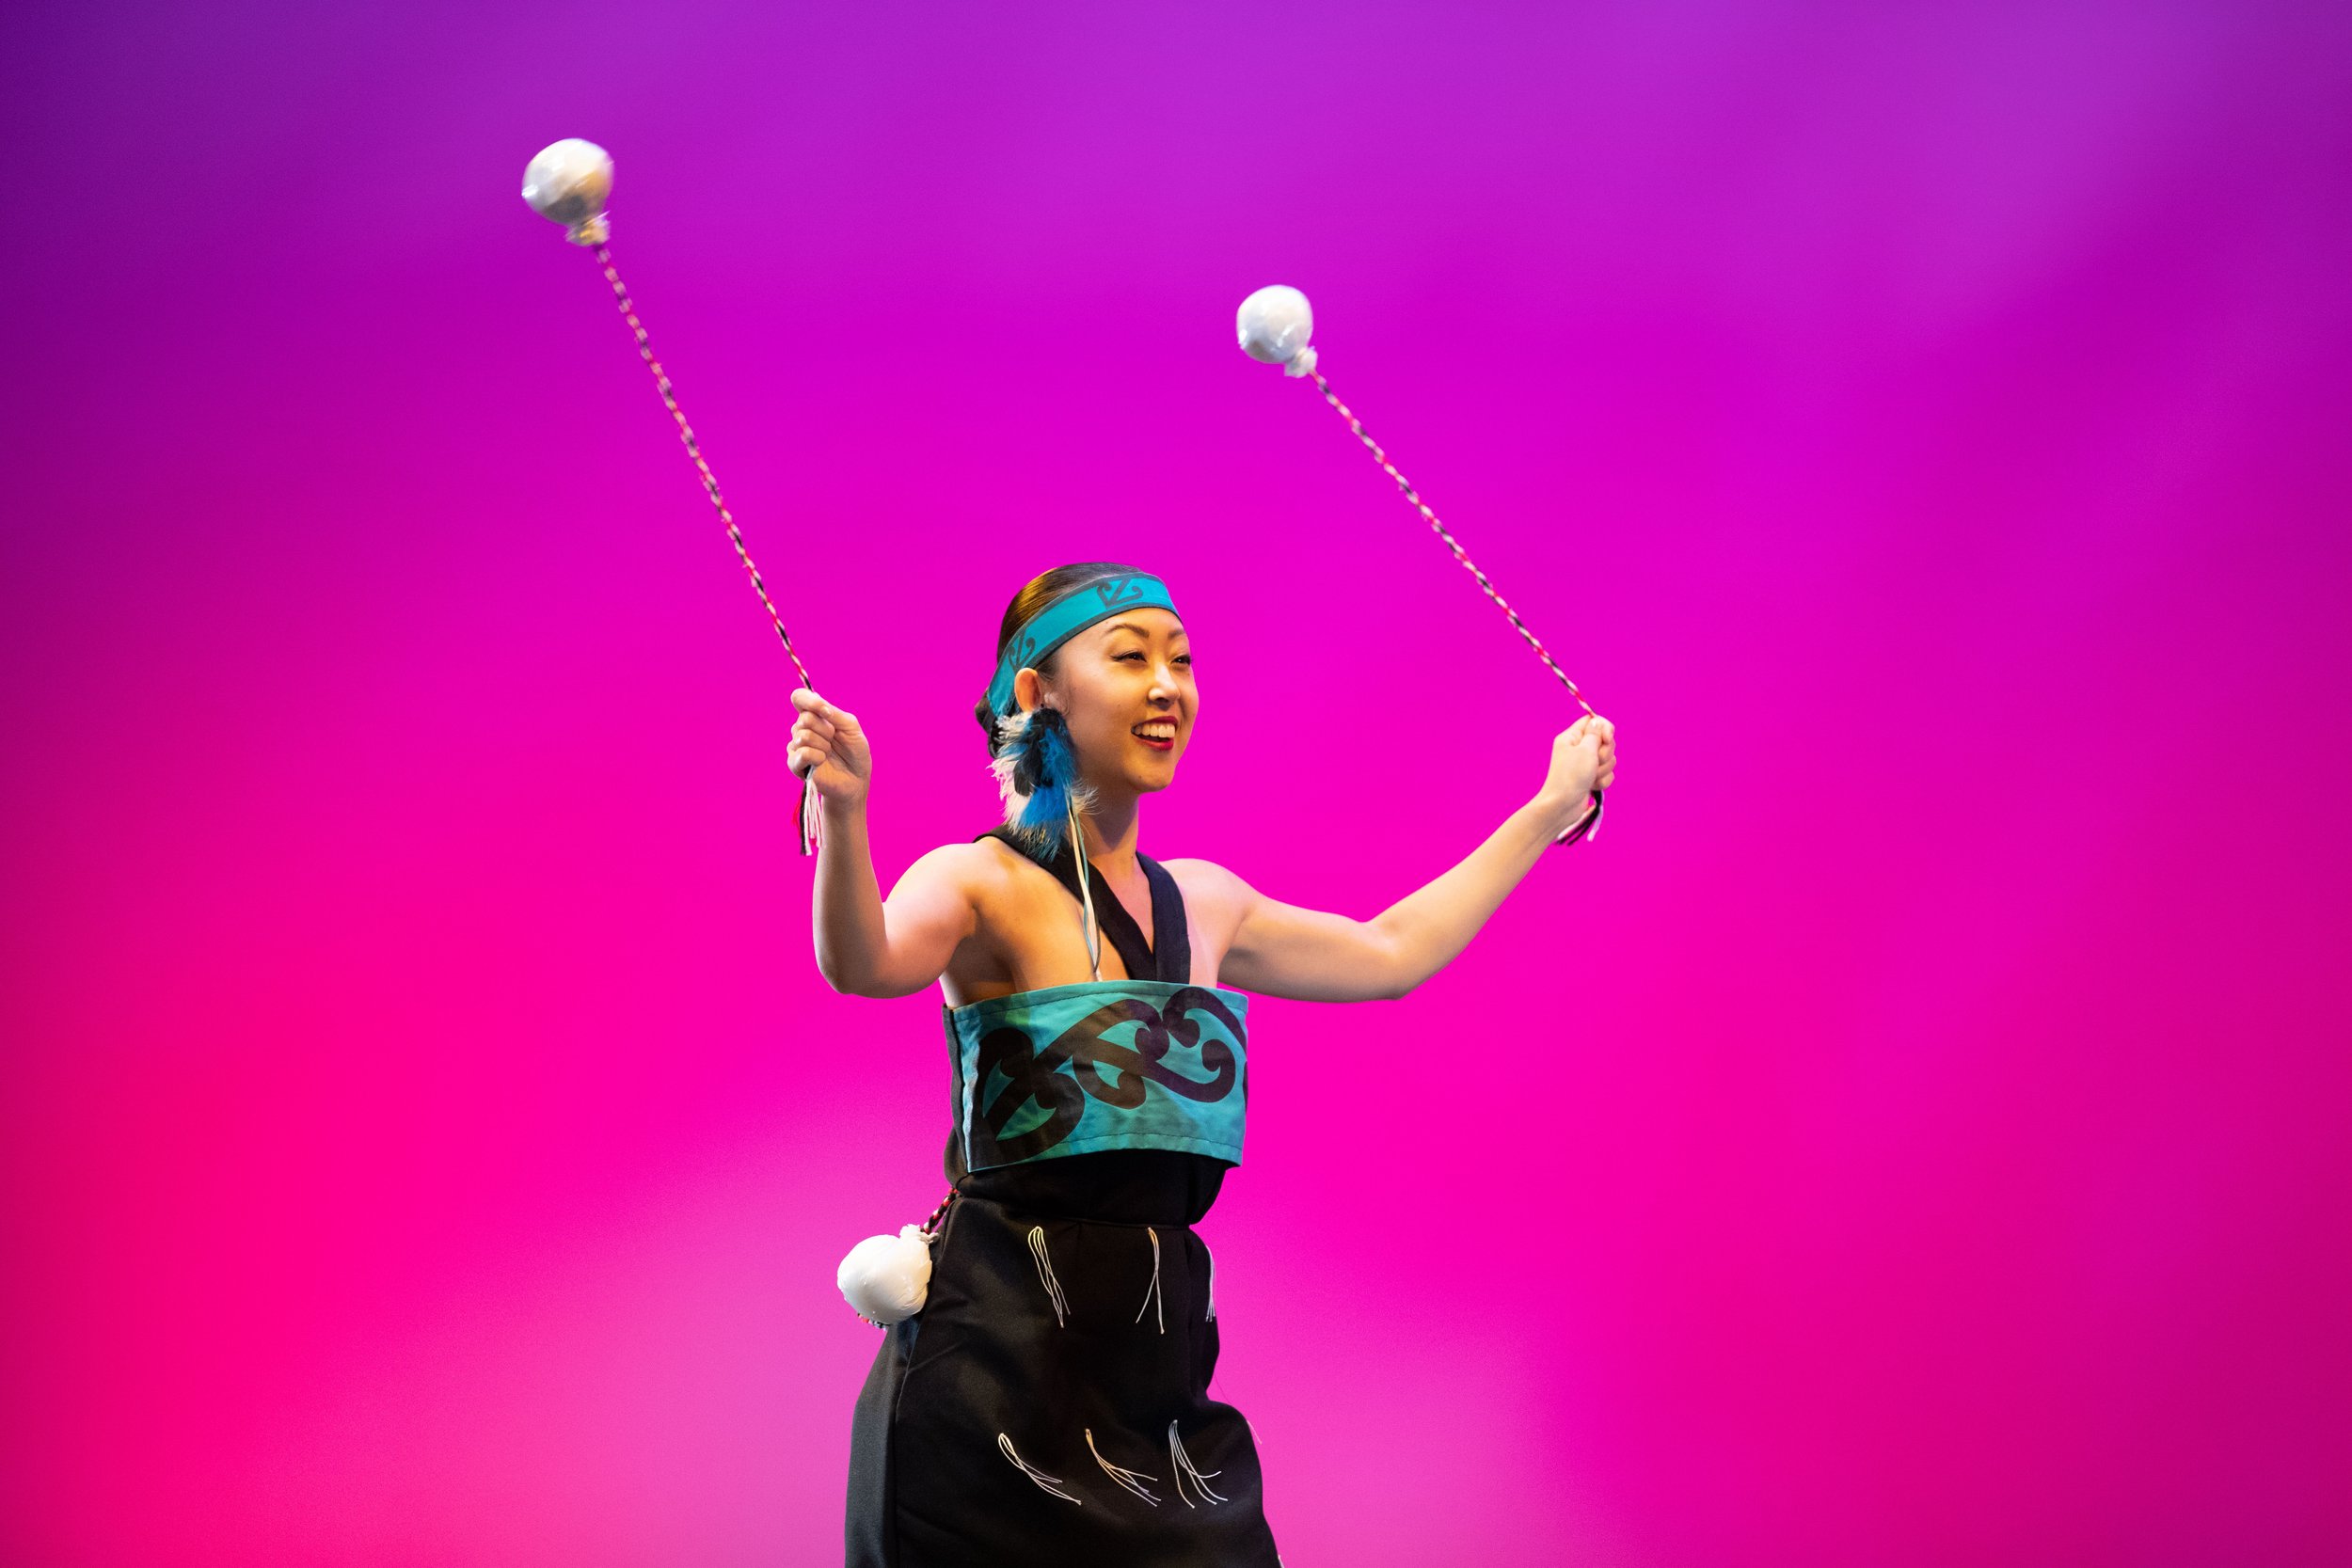  SMC students perform world dance styles with the Global Motion World Dance Company during the live performance at The Broad Theater in Santa Monica, Calif. This company provides a platform for students to experience and learn about other cultures th